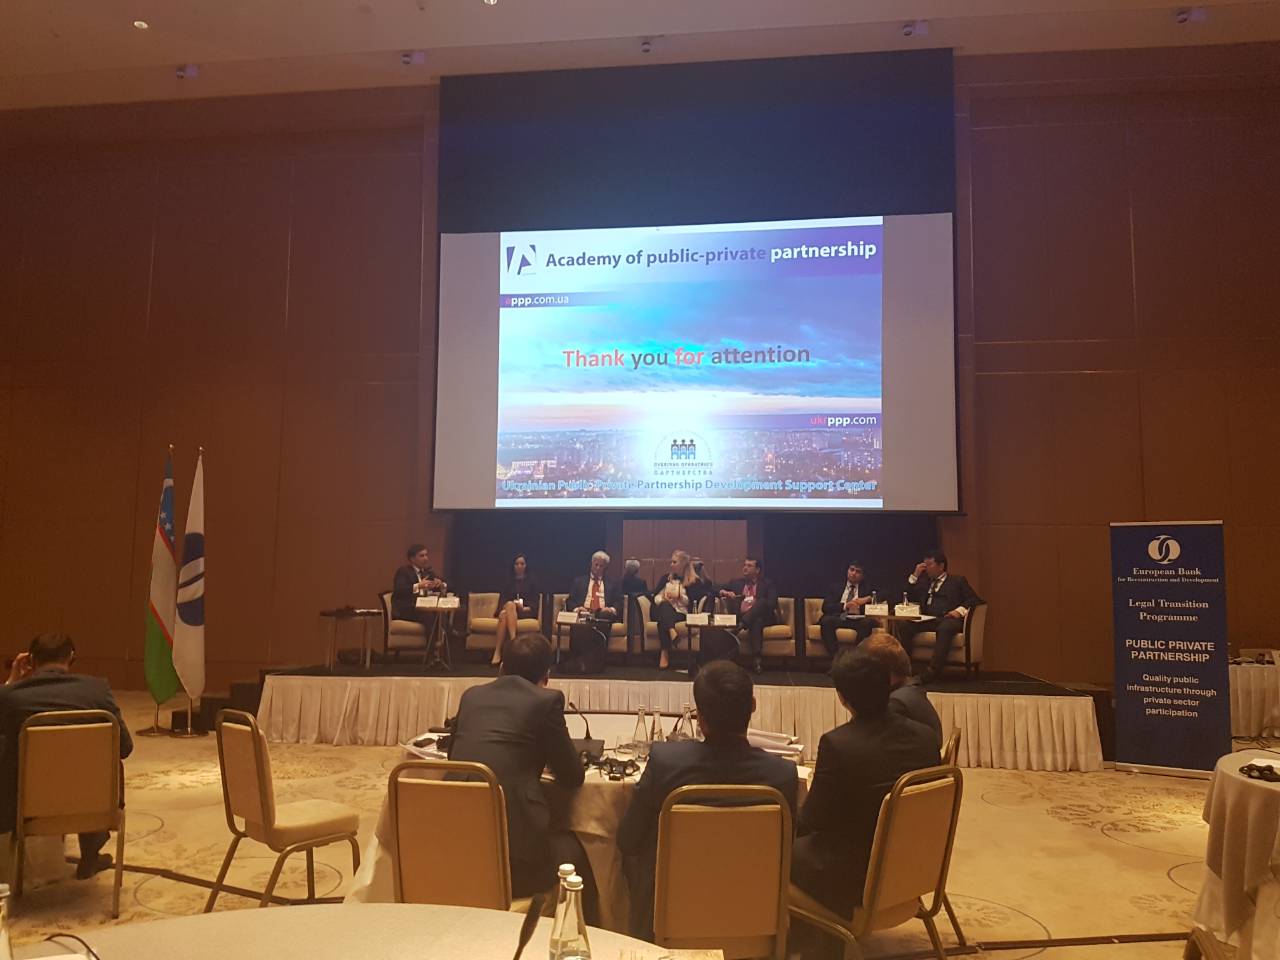 On March 16, 2018 in Tashkent took place International Workshop “Public-Private Partnerships: Promoting International Standards and Best Practices in Uzbekistan” organized by the EBRD with the support of IFC and UNDP